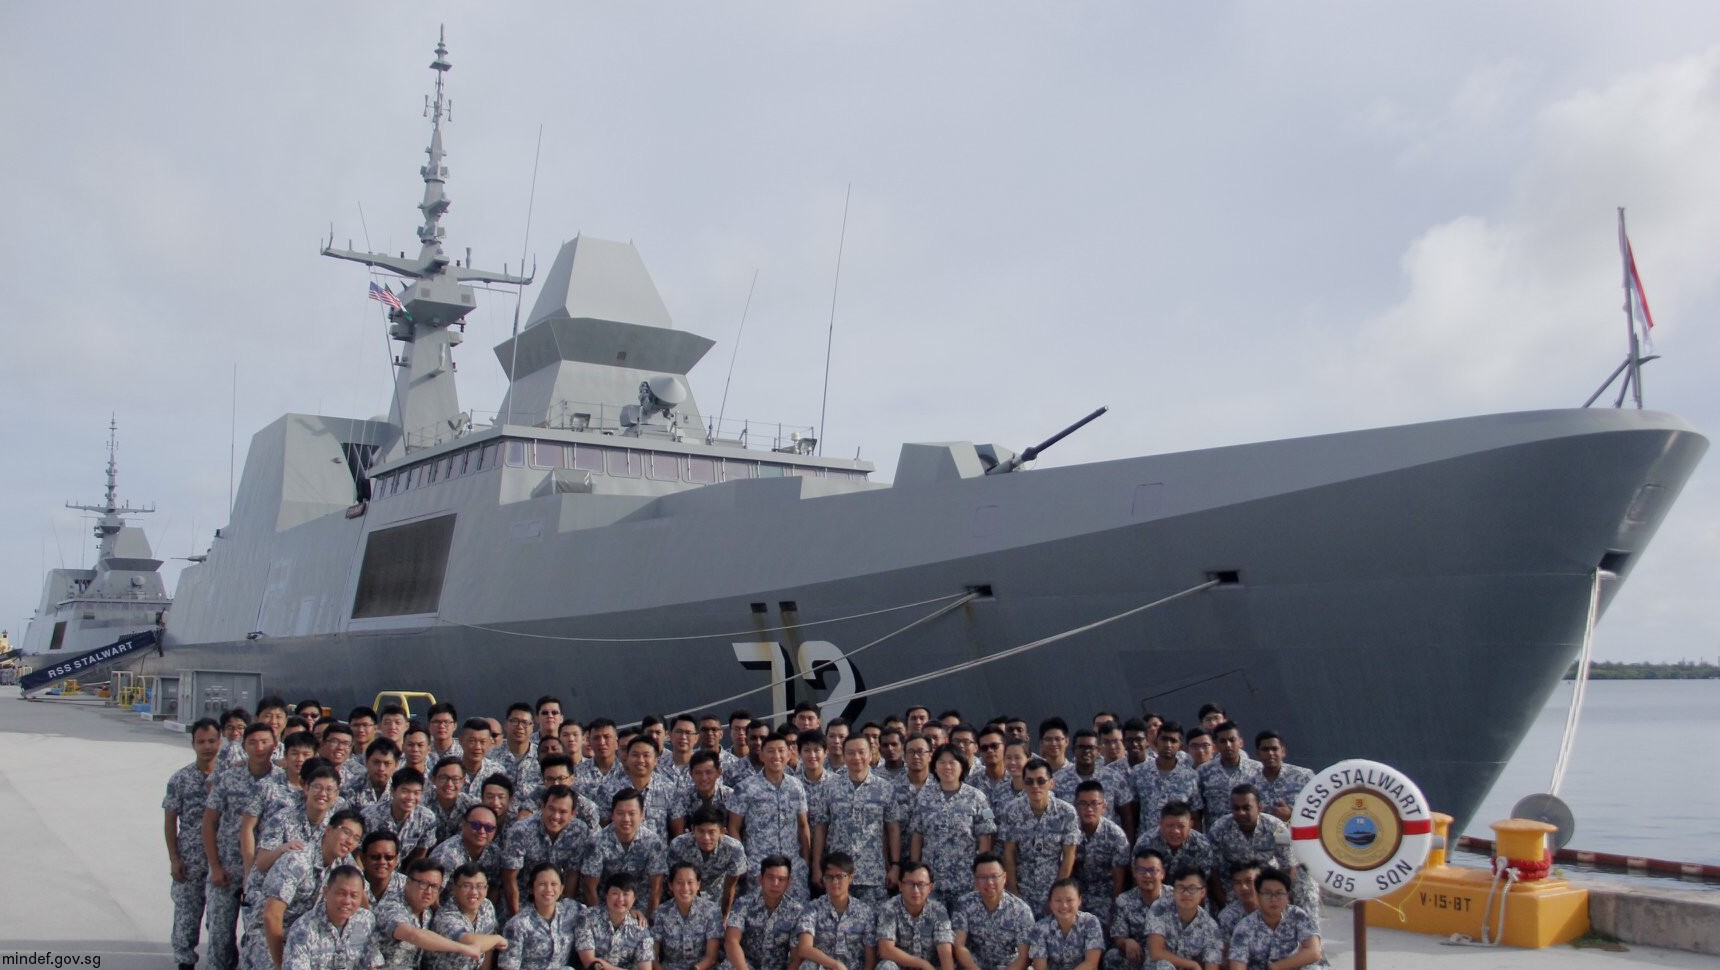 72 rss stalwart formidable class multi-mission missile frigate ffg republic singapore navy 06